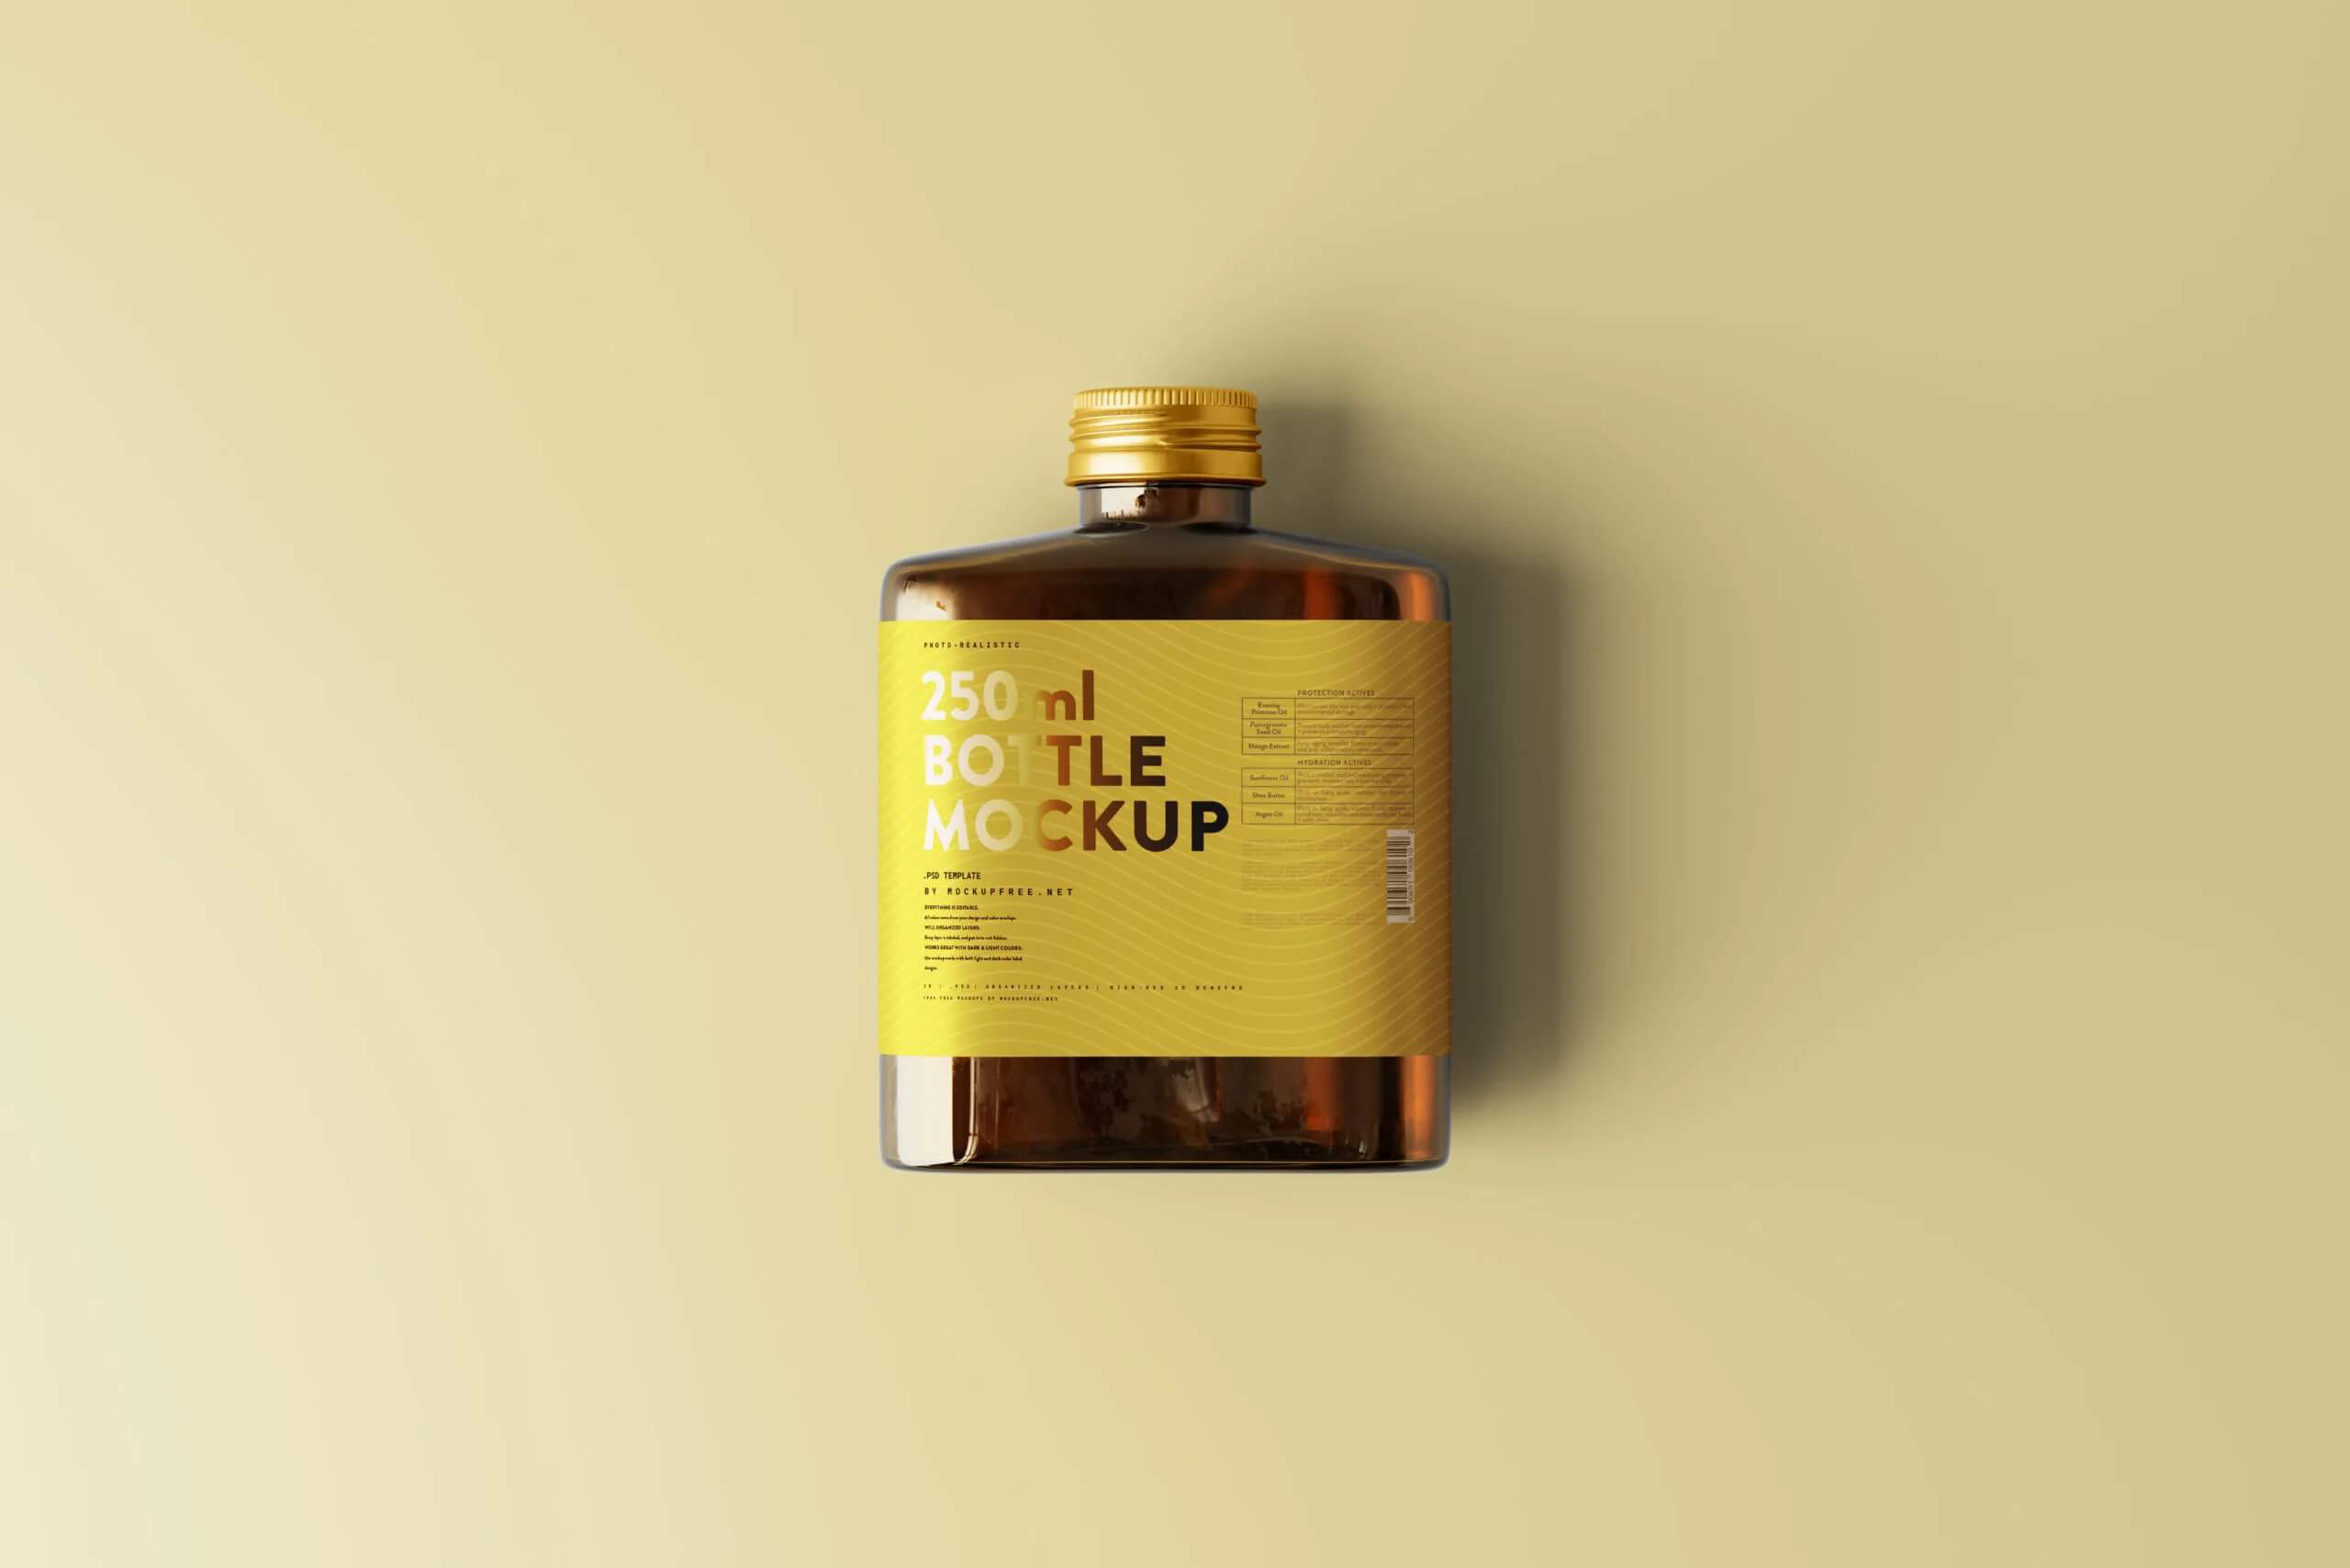 5 Flat Liquor Bottle Mockups with Screw Cap in Varied Sights5